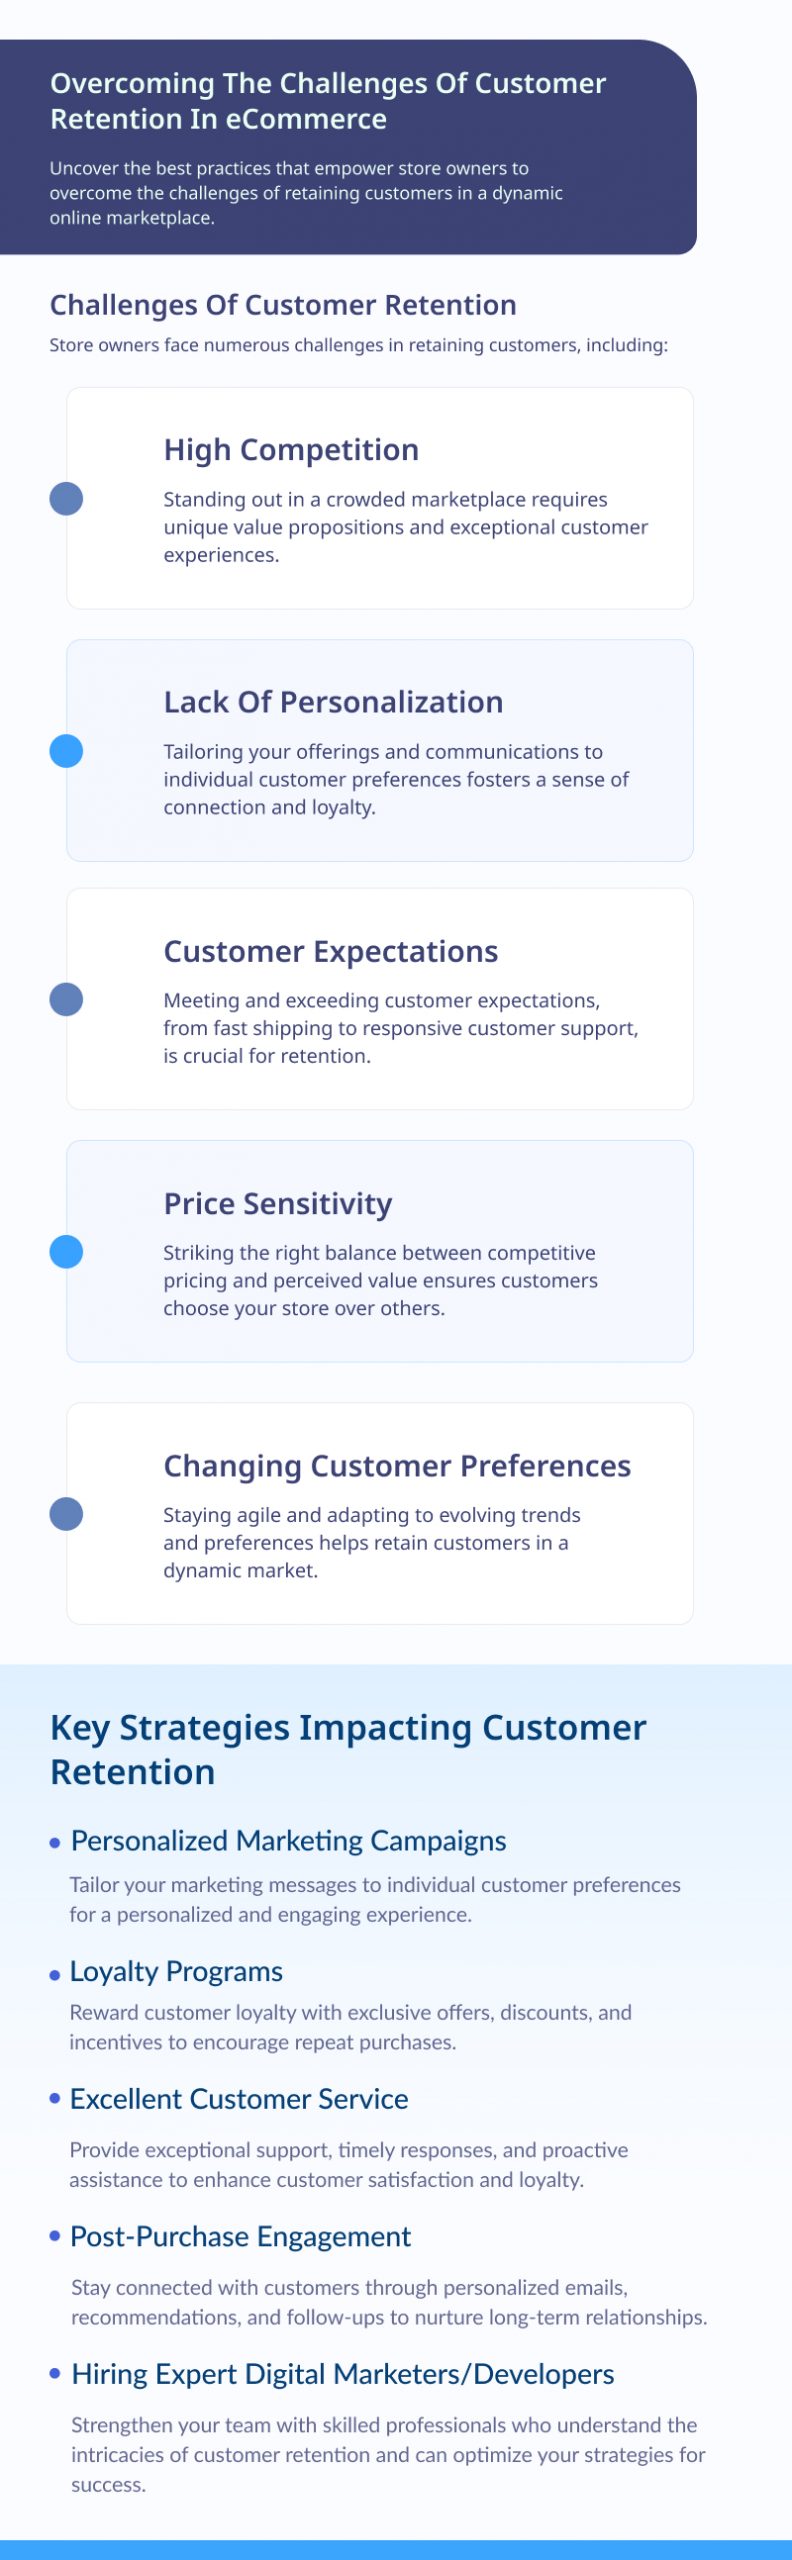 Challenges Of Customer Retention In eCommerce
